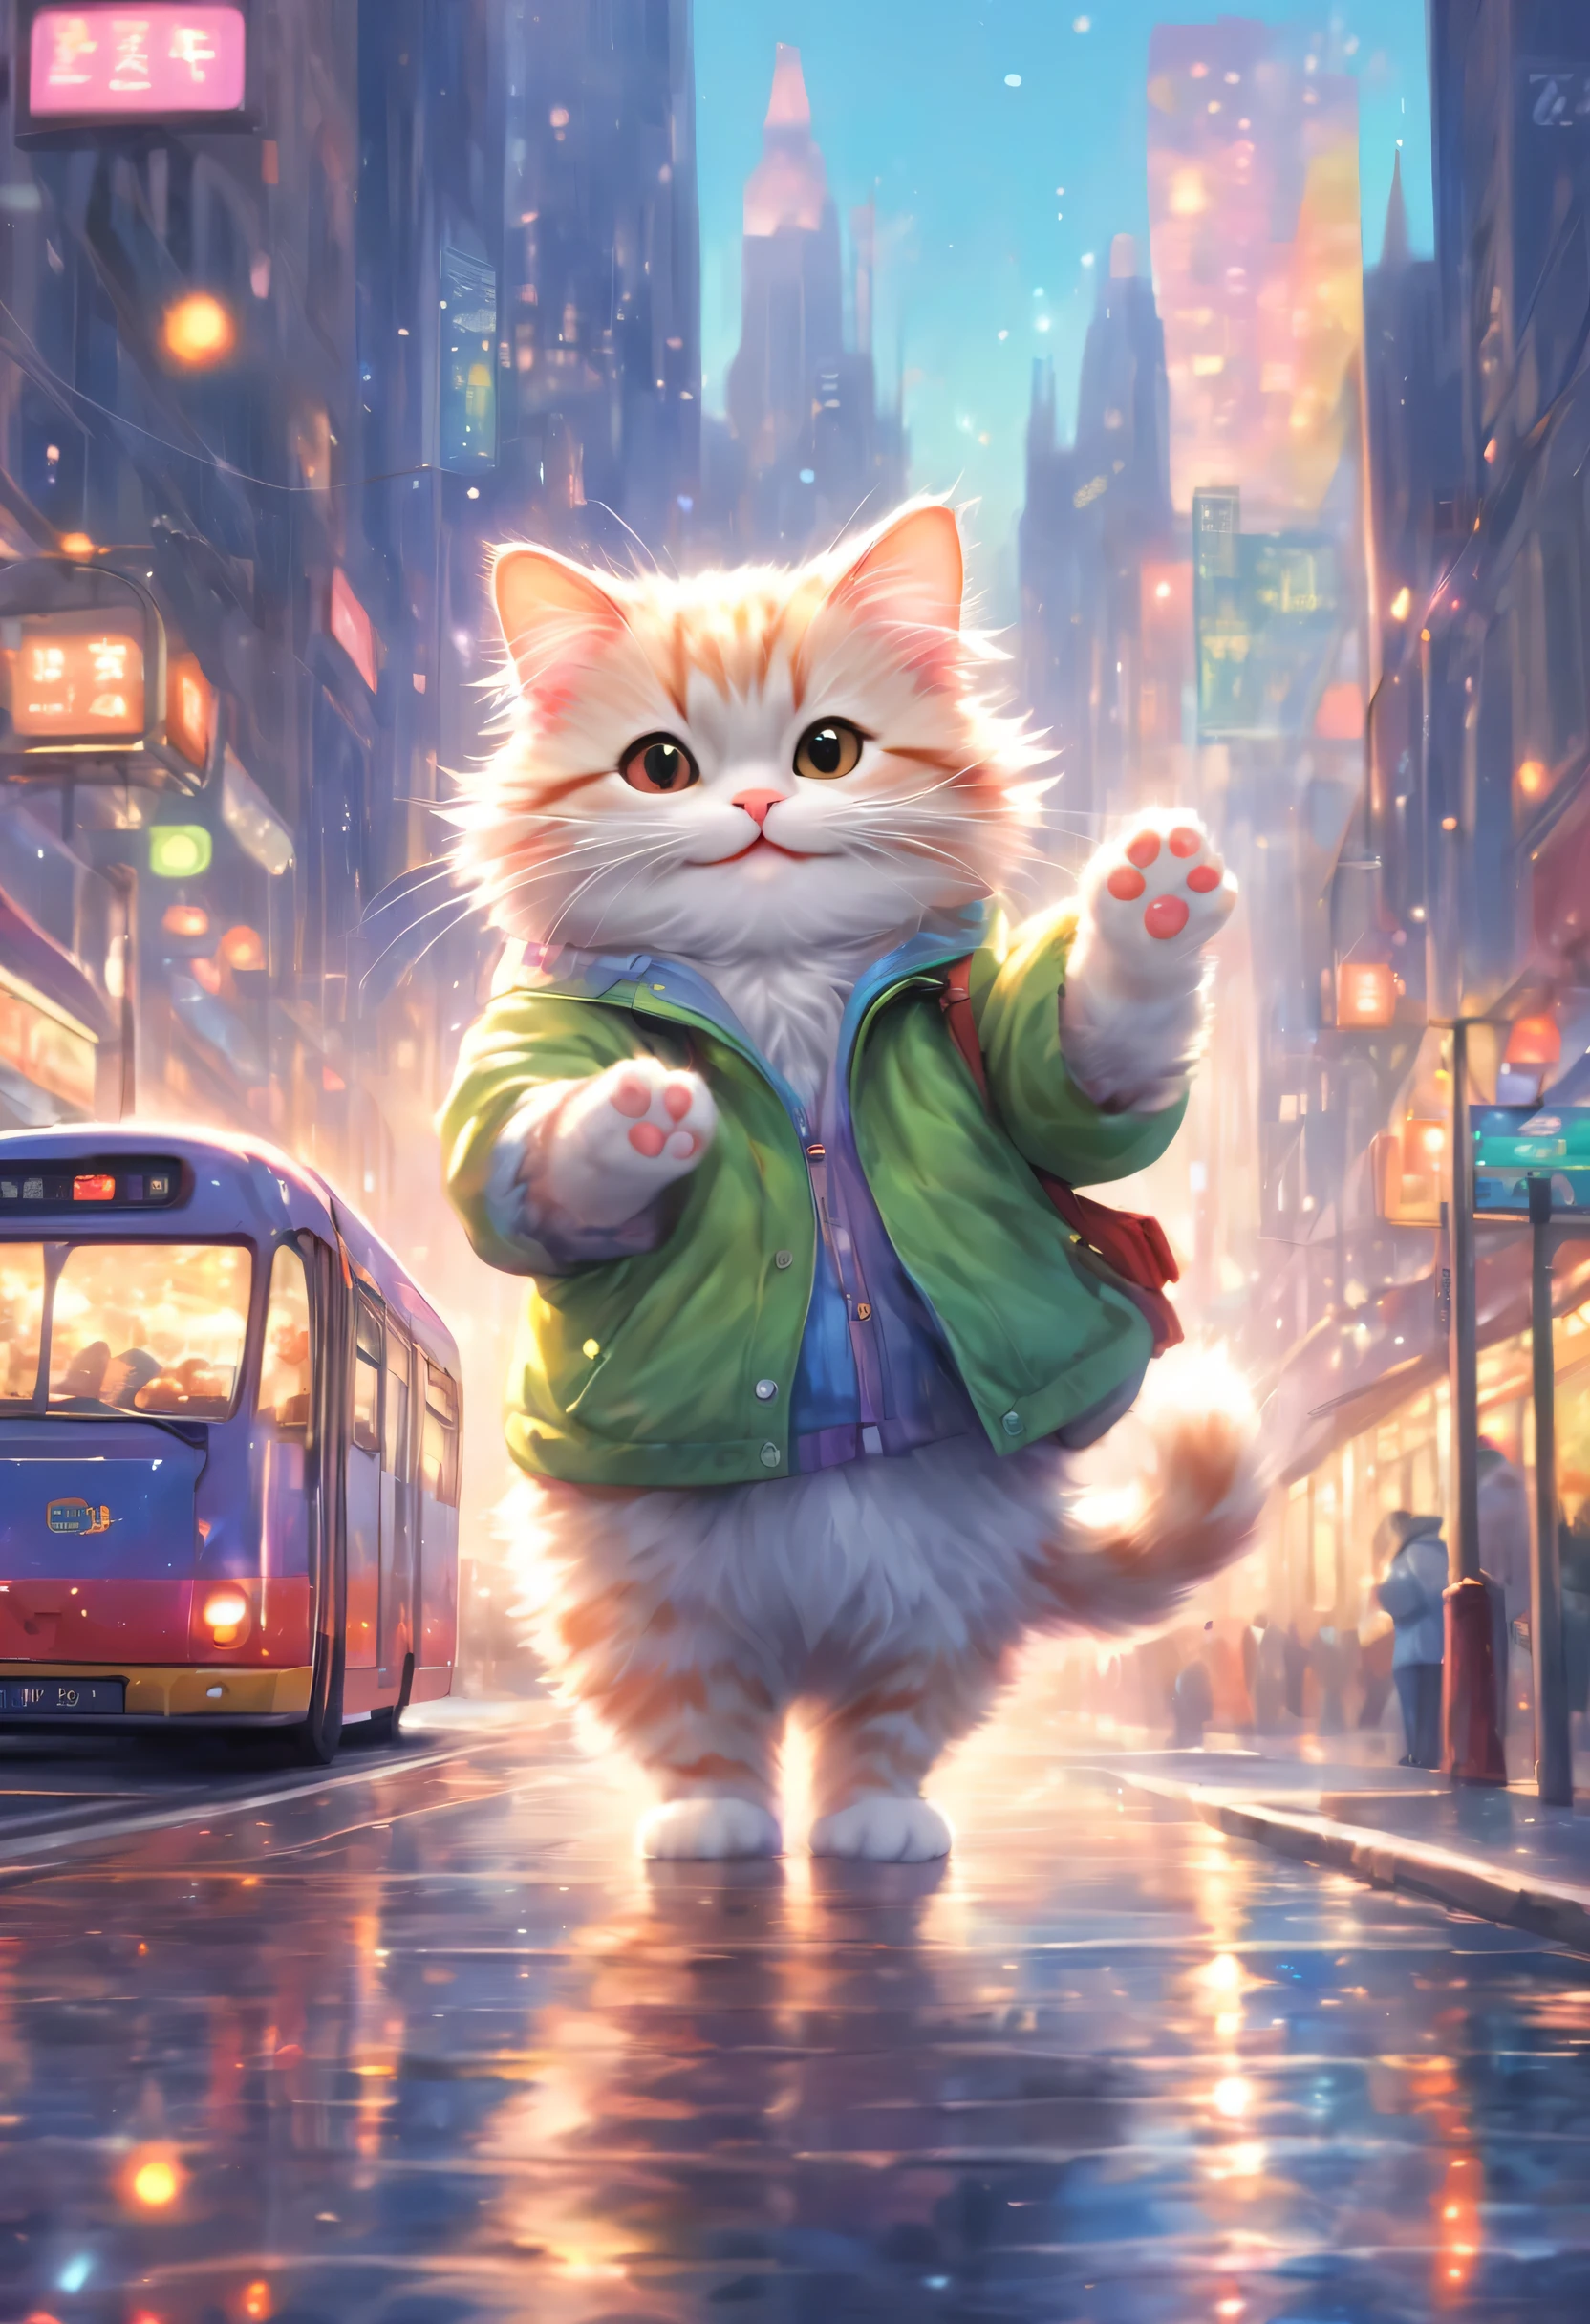 anthropomorphic cat,minuet,bus stop,See timetable,cute,fluffy fur,masterpiece,rich colors,highest quality,official art,fantasy,colorful,Happy,smile,最高にcute猫,fluffy cat,I&#39;m looking forward to,happiness,nice background,stylish cityscape,fun outing,fun waiting time,Sparkling,beautiful light and shadow,